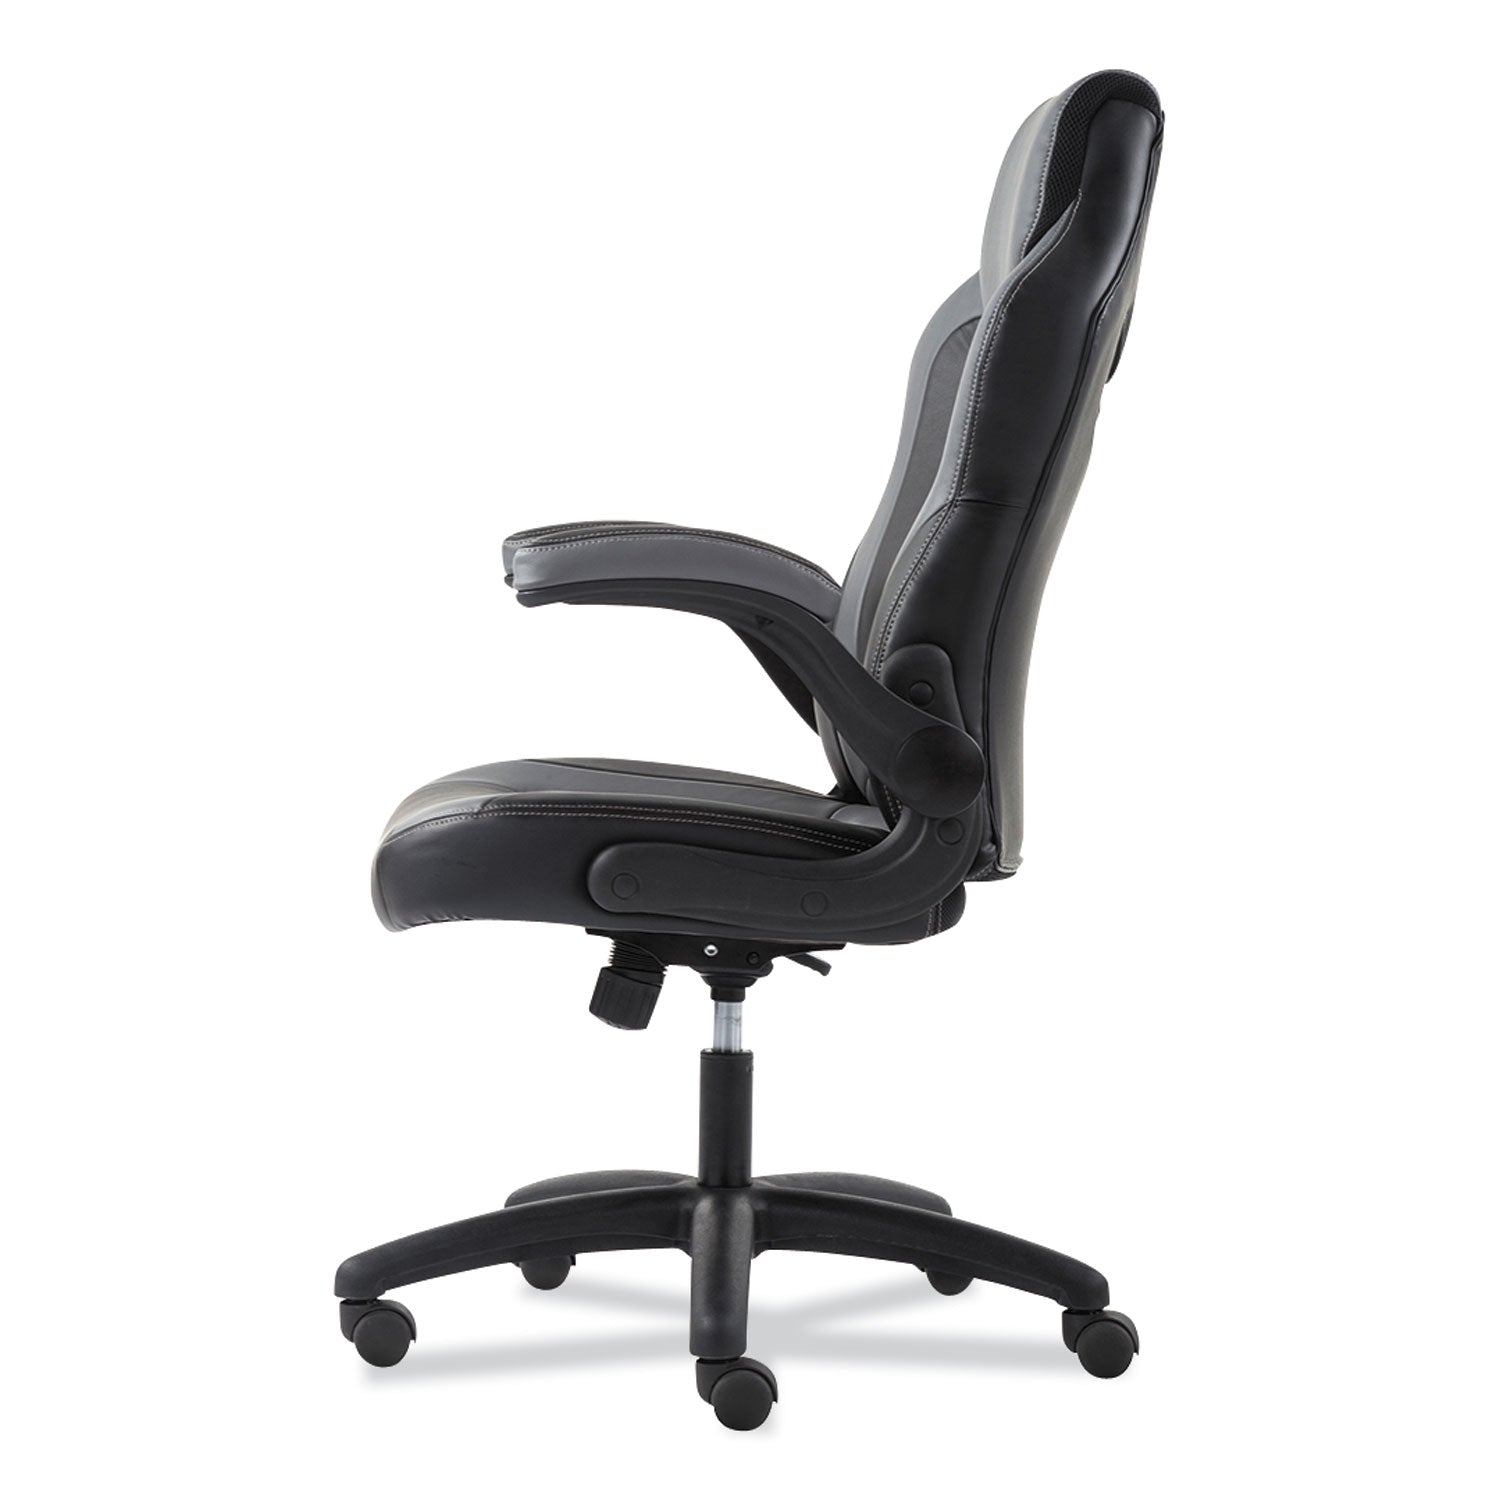 9-one-one-high-back-racing-style-chair-with-flip-up-arms-supports-up-to-225-lb-black-seat-gray-back-black-base_bsxvst911 - 5